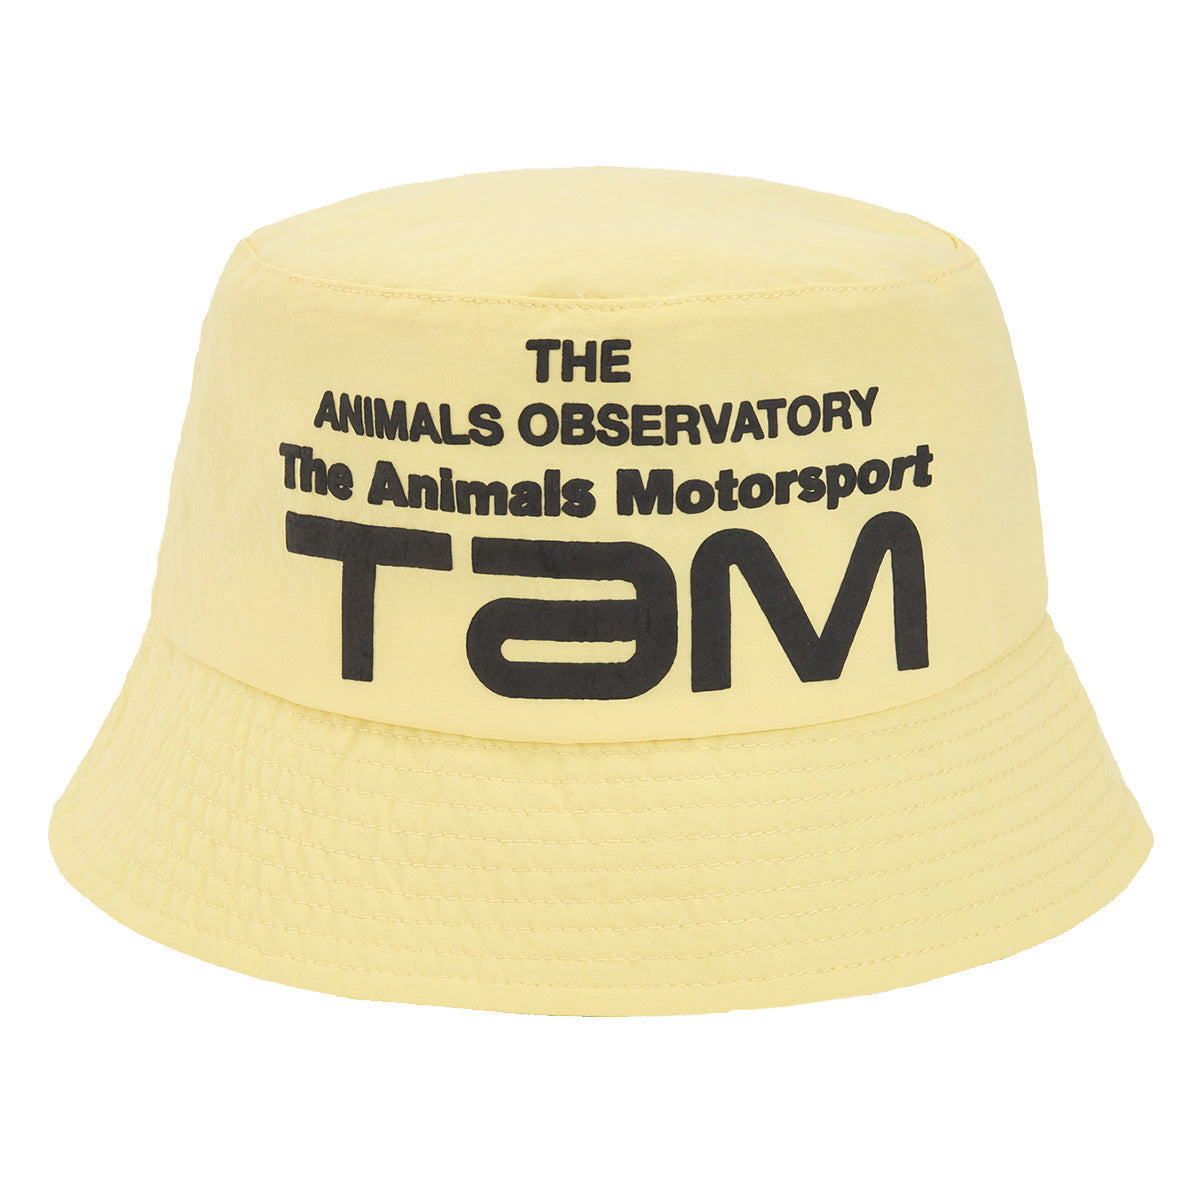 The Starfish Bucket Hat in soft yellow features a vintage-inspired motorsport sign